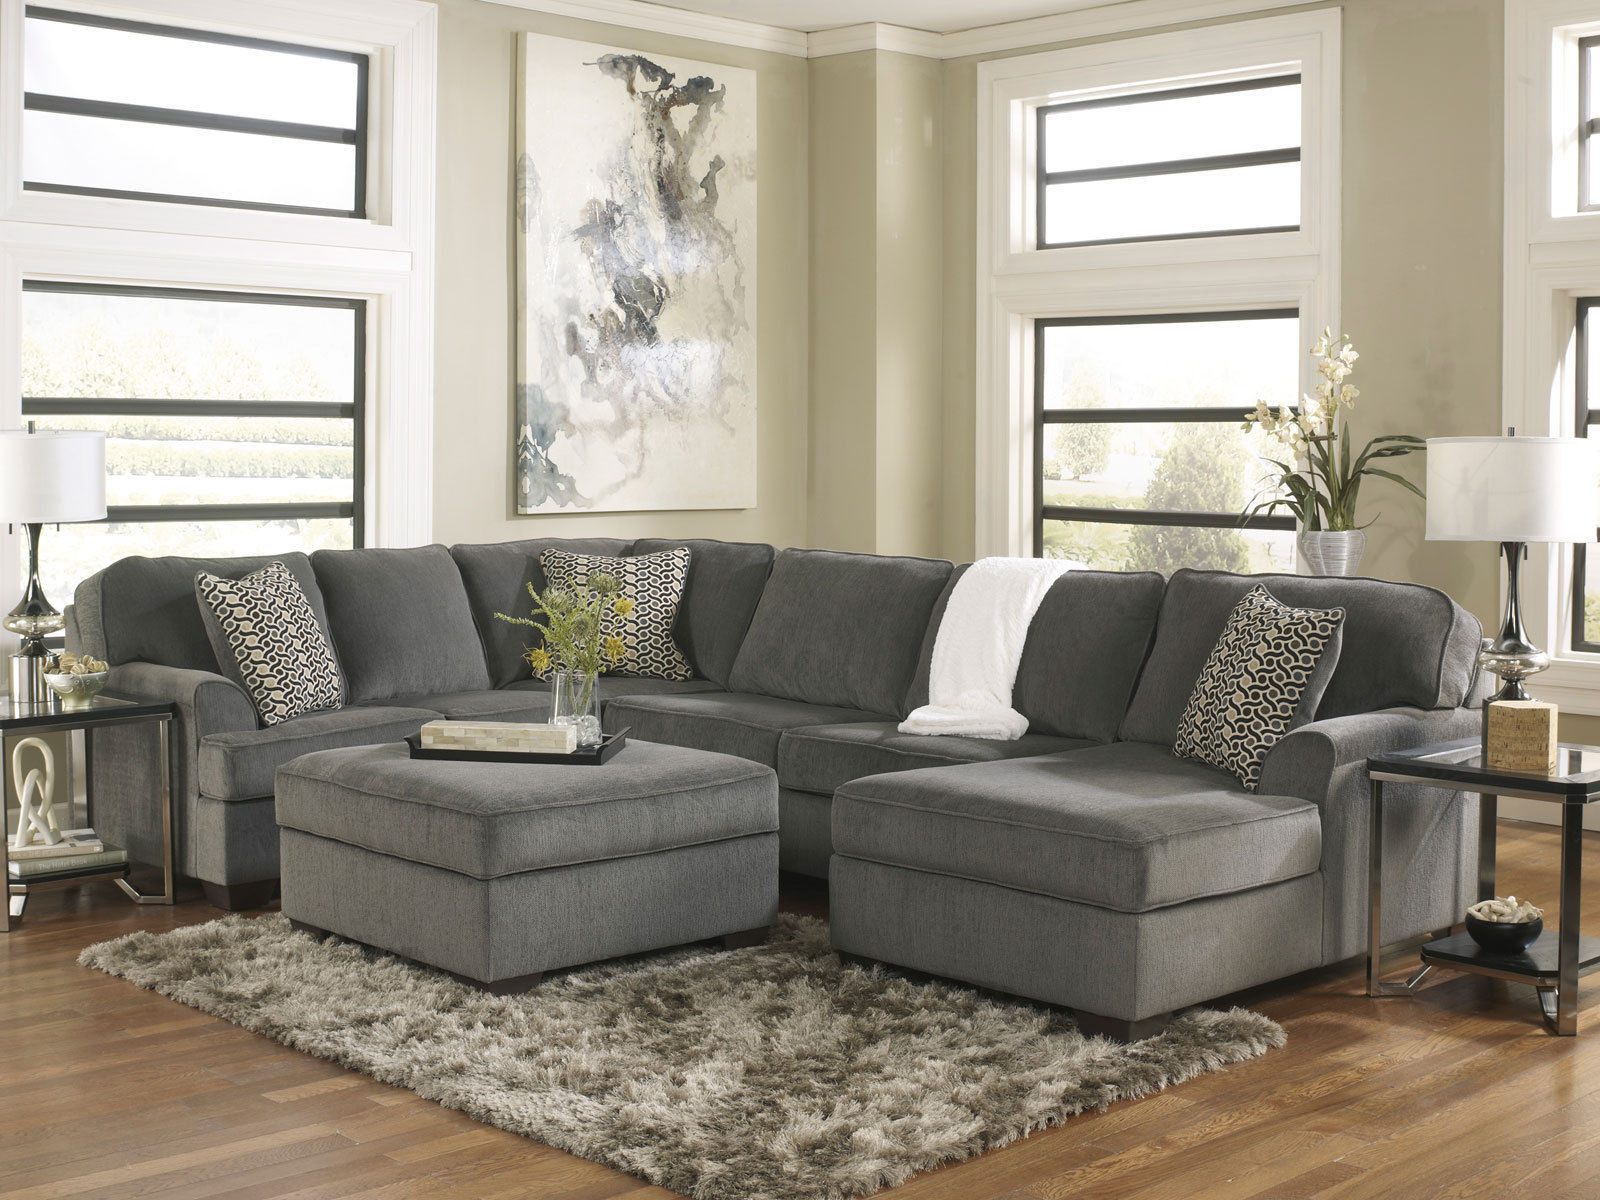 Grey Living Room Furniture Ideas
 SOLE OVERSIZED MODERN GRAY FABRIC SOFA COUCH SECTIONAL SET